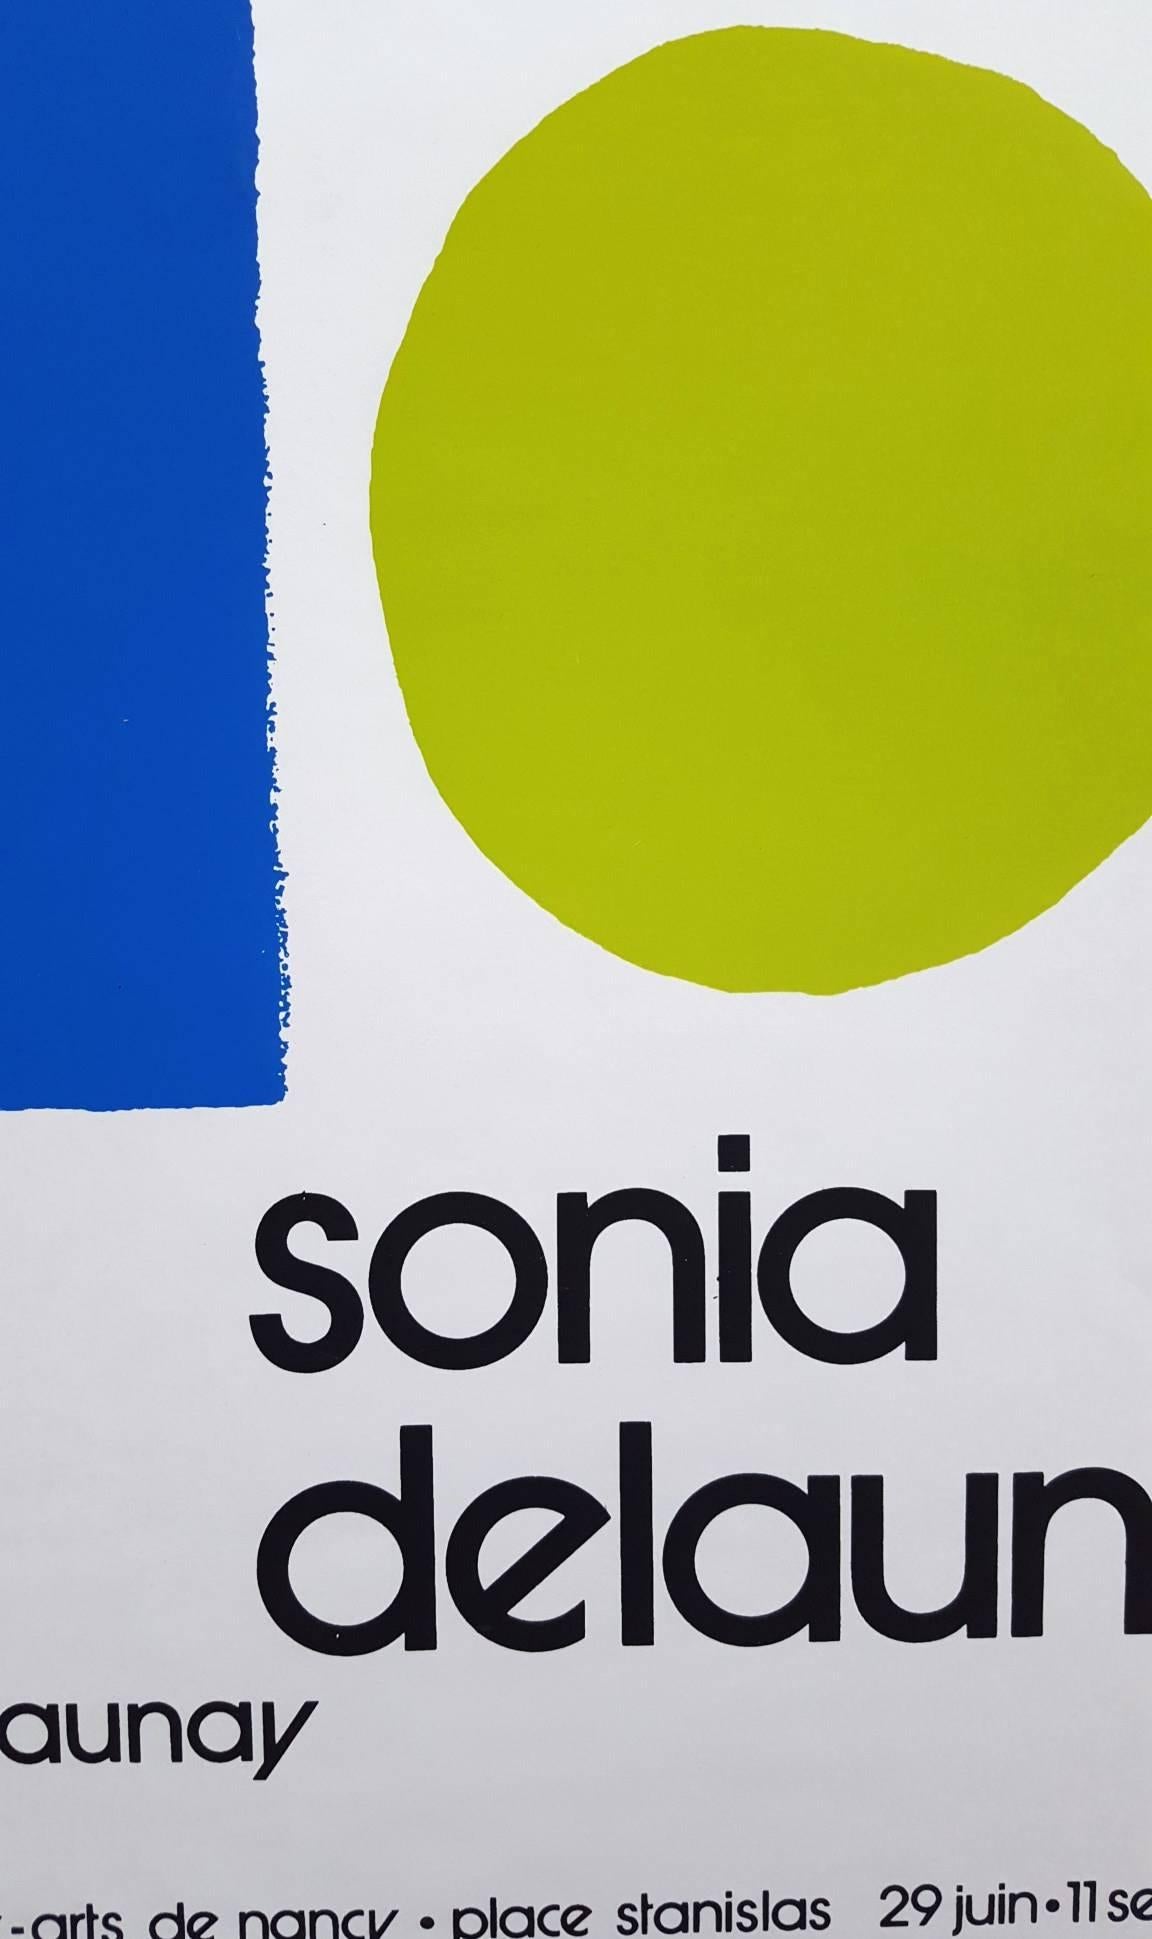 Musee des Beaux-Arts: Sonia Delaunay & Robert Delaunay - Abstract Print by (after) Sonia Delaunay